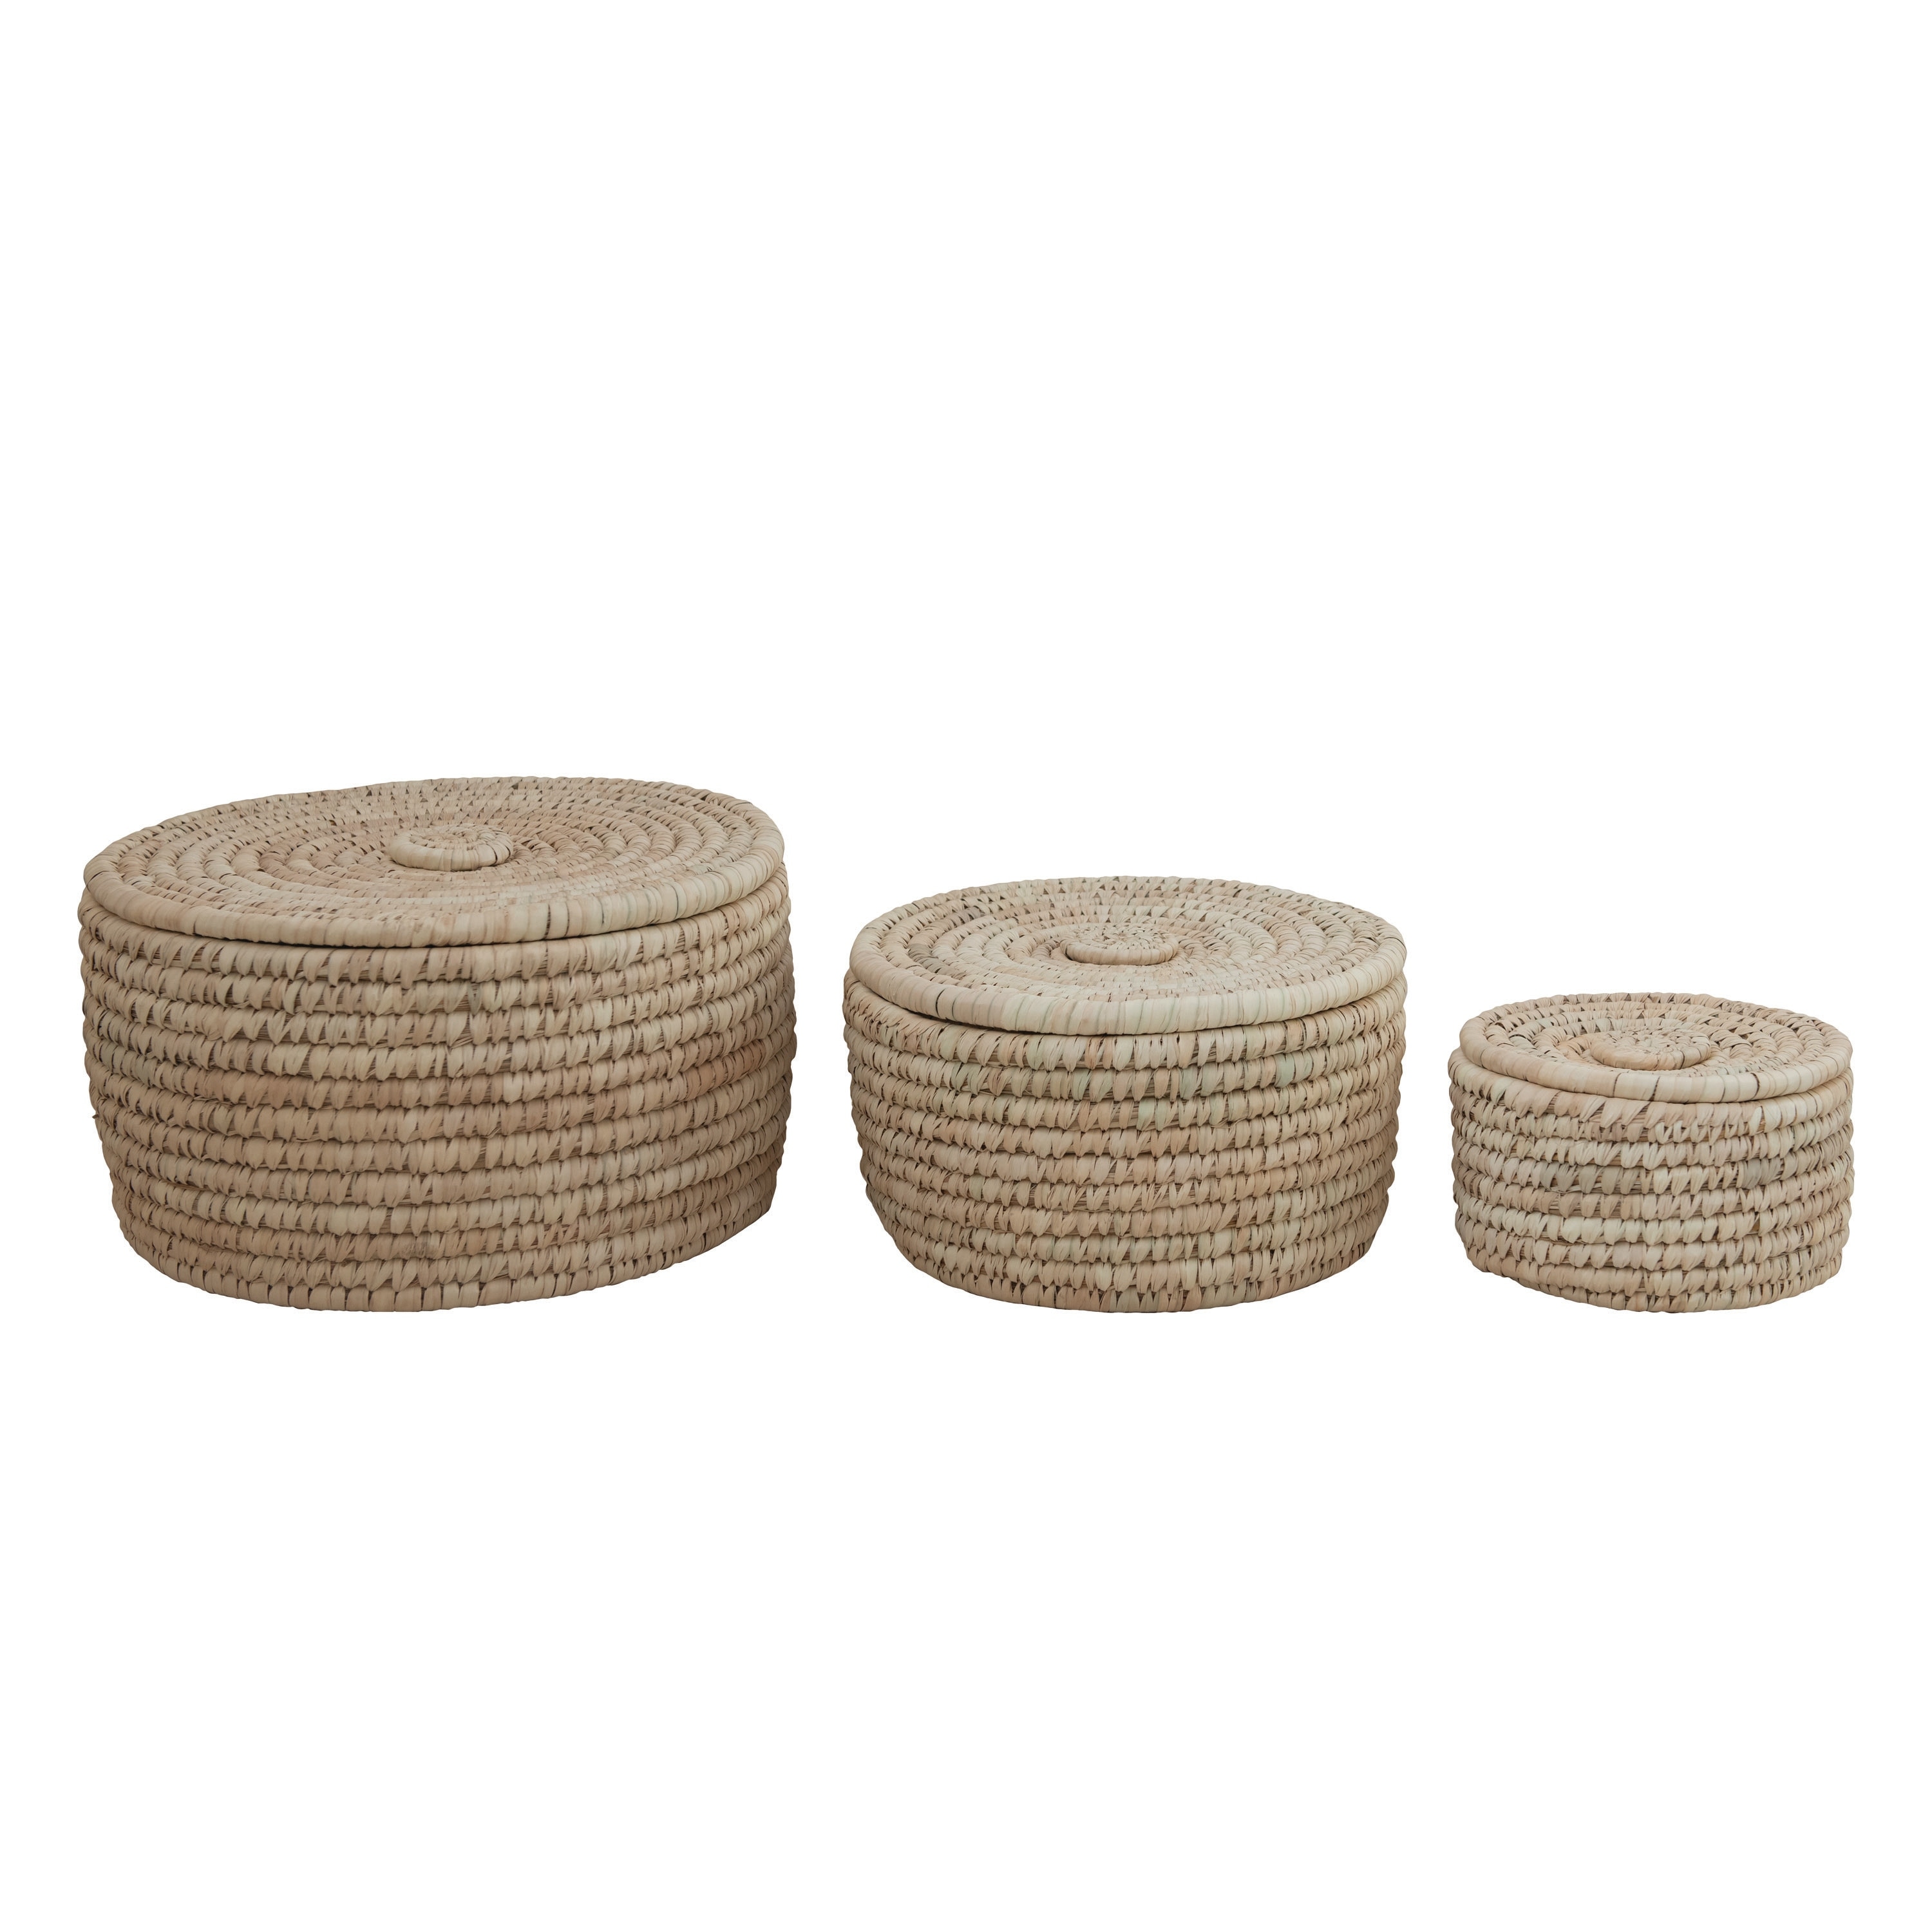 Hand-Woven Grass  Date Leaf Baskets with Lids, Set of On Sale Bed  Bath  Beyond 33746645